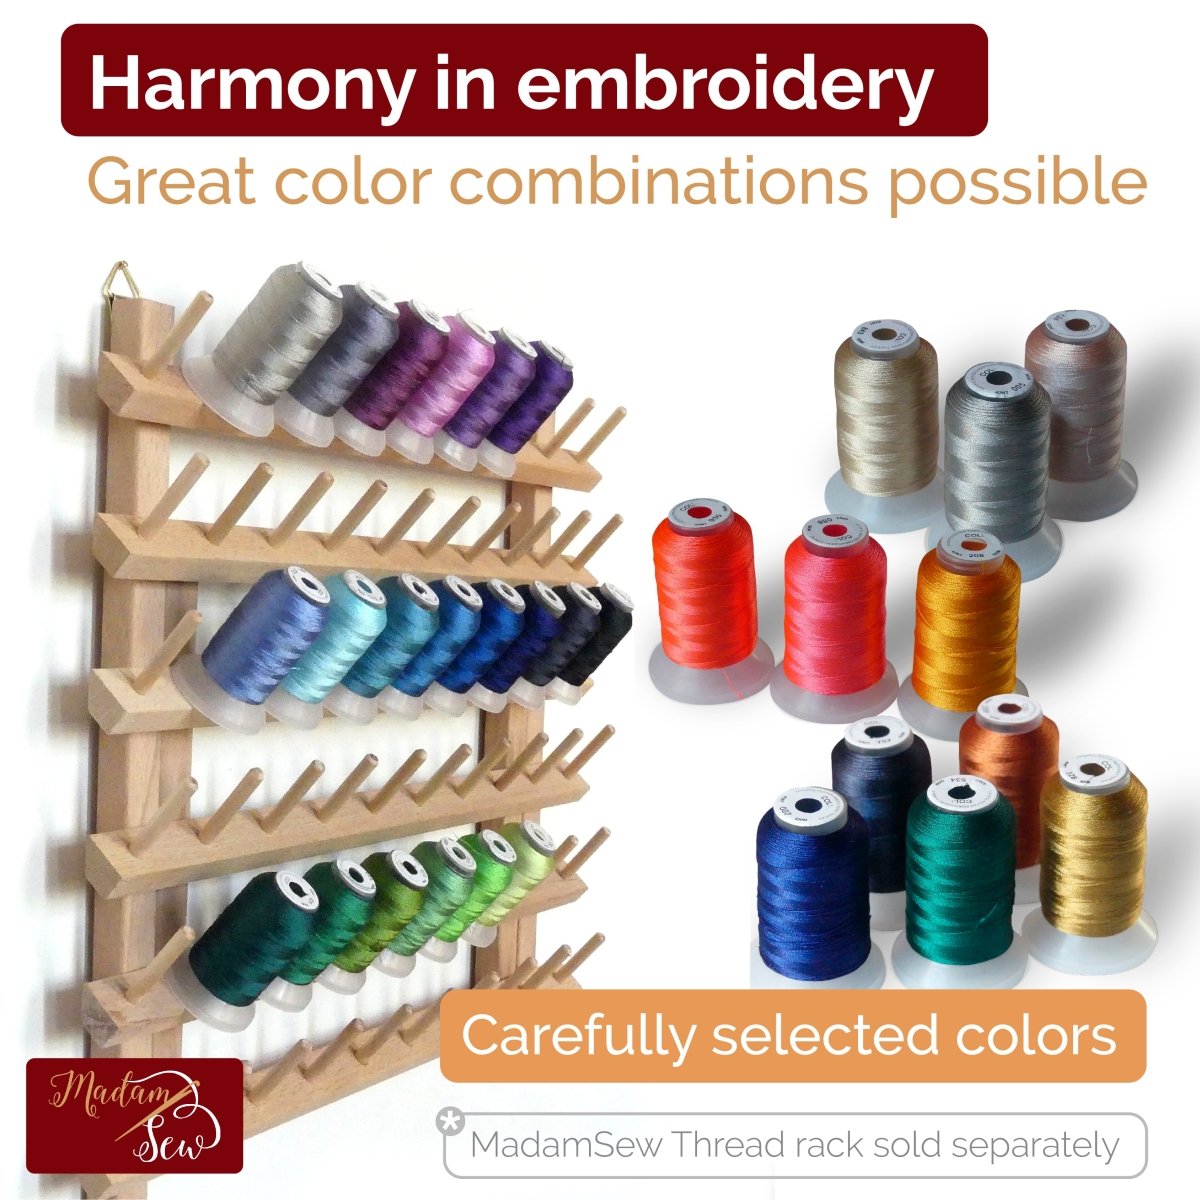 Cones of Embroidery Thread in different colors on a thread rack